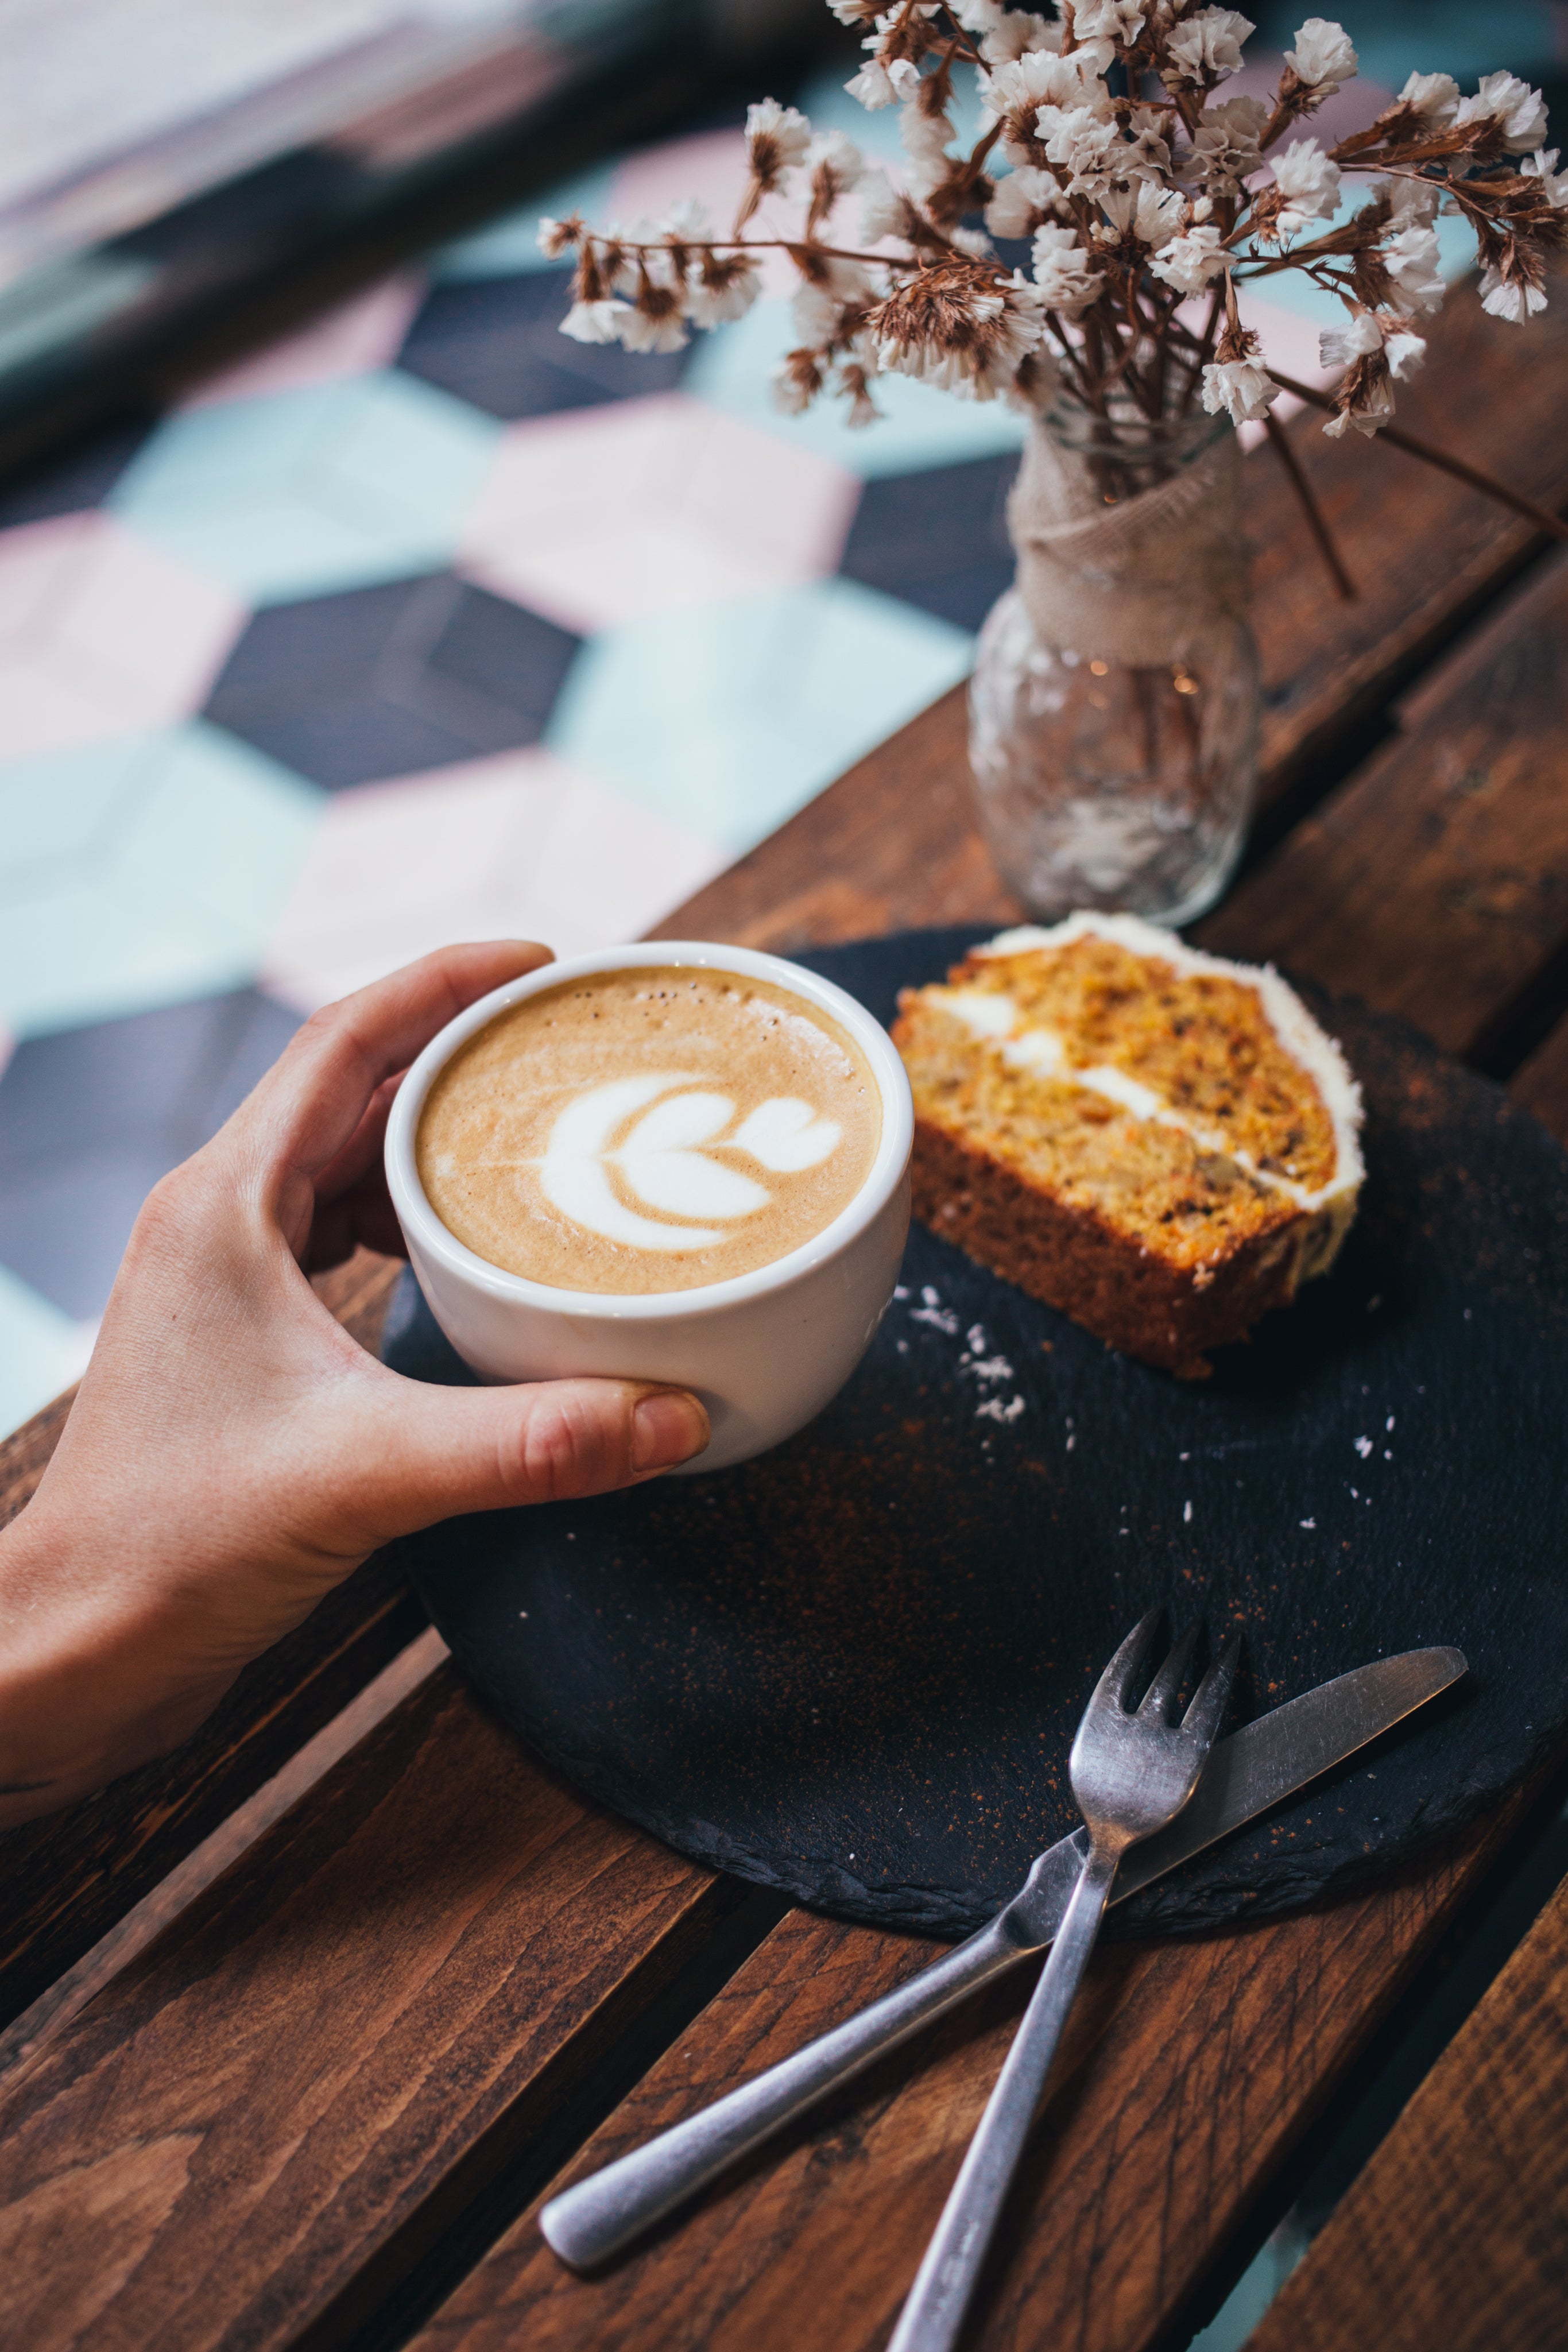 Lady's hand holding a white cup of delicious Ma' Cline's Coffee with cream topper in the shape of a tree. Next to the cup is a slice of iced banana nut bread.